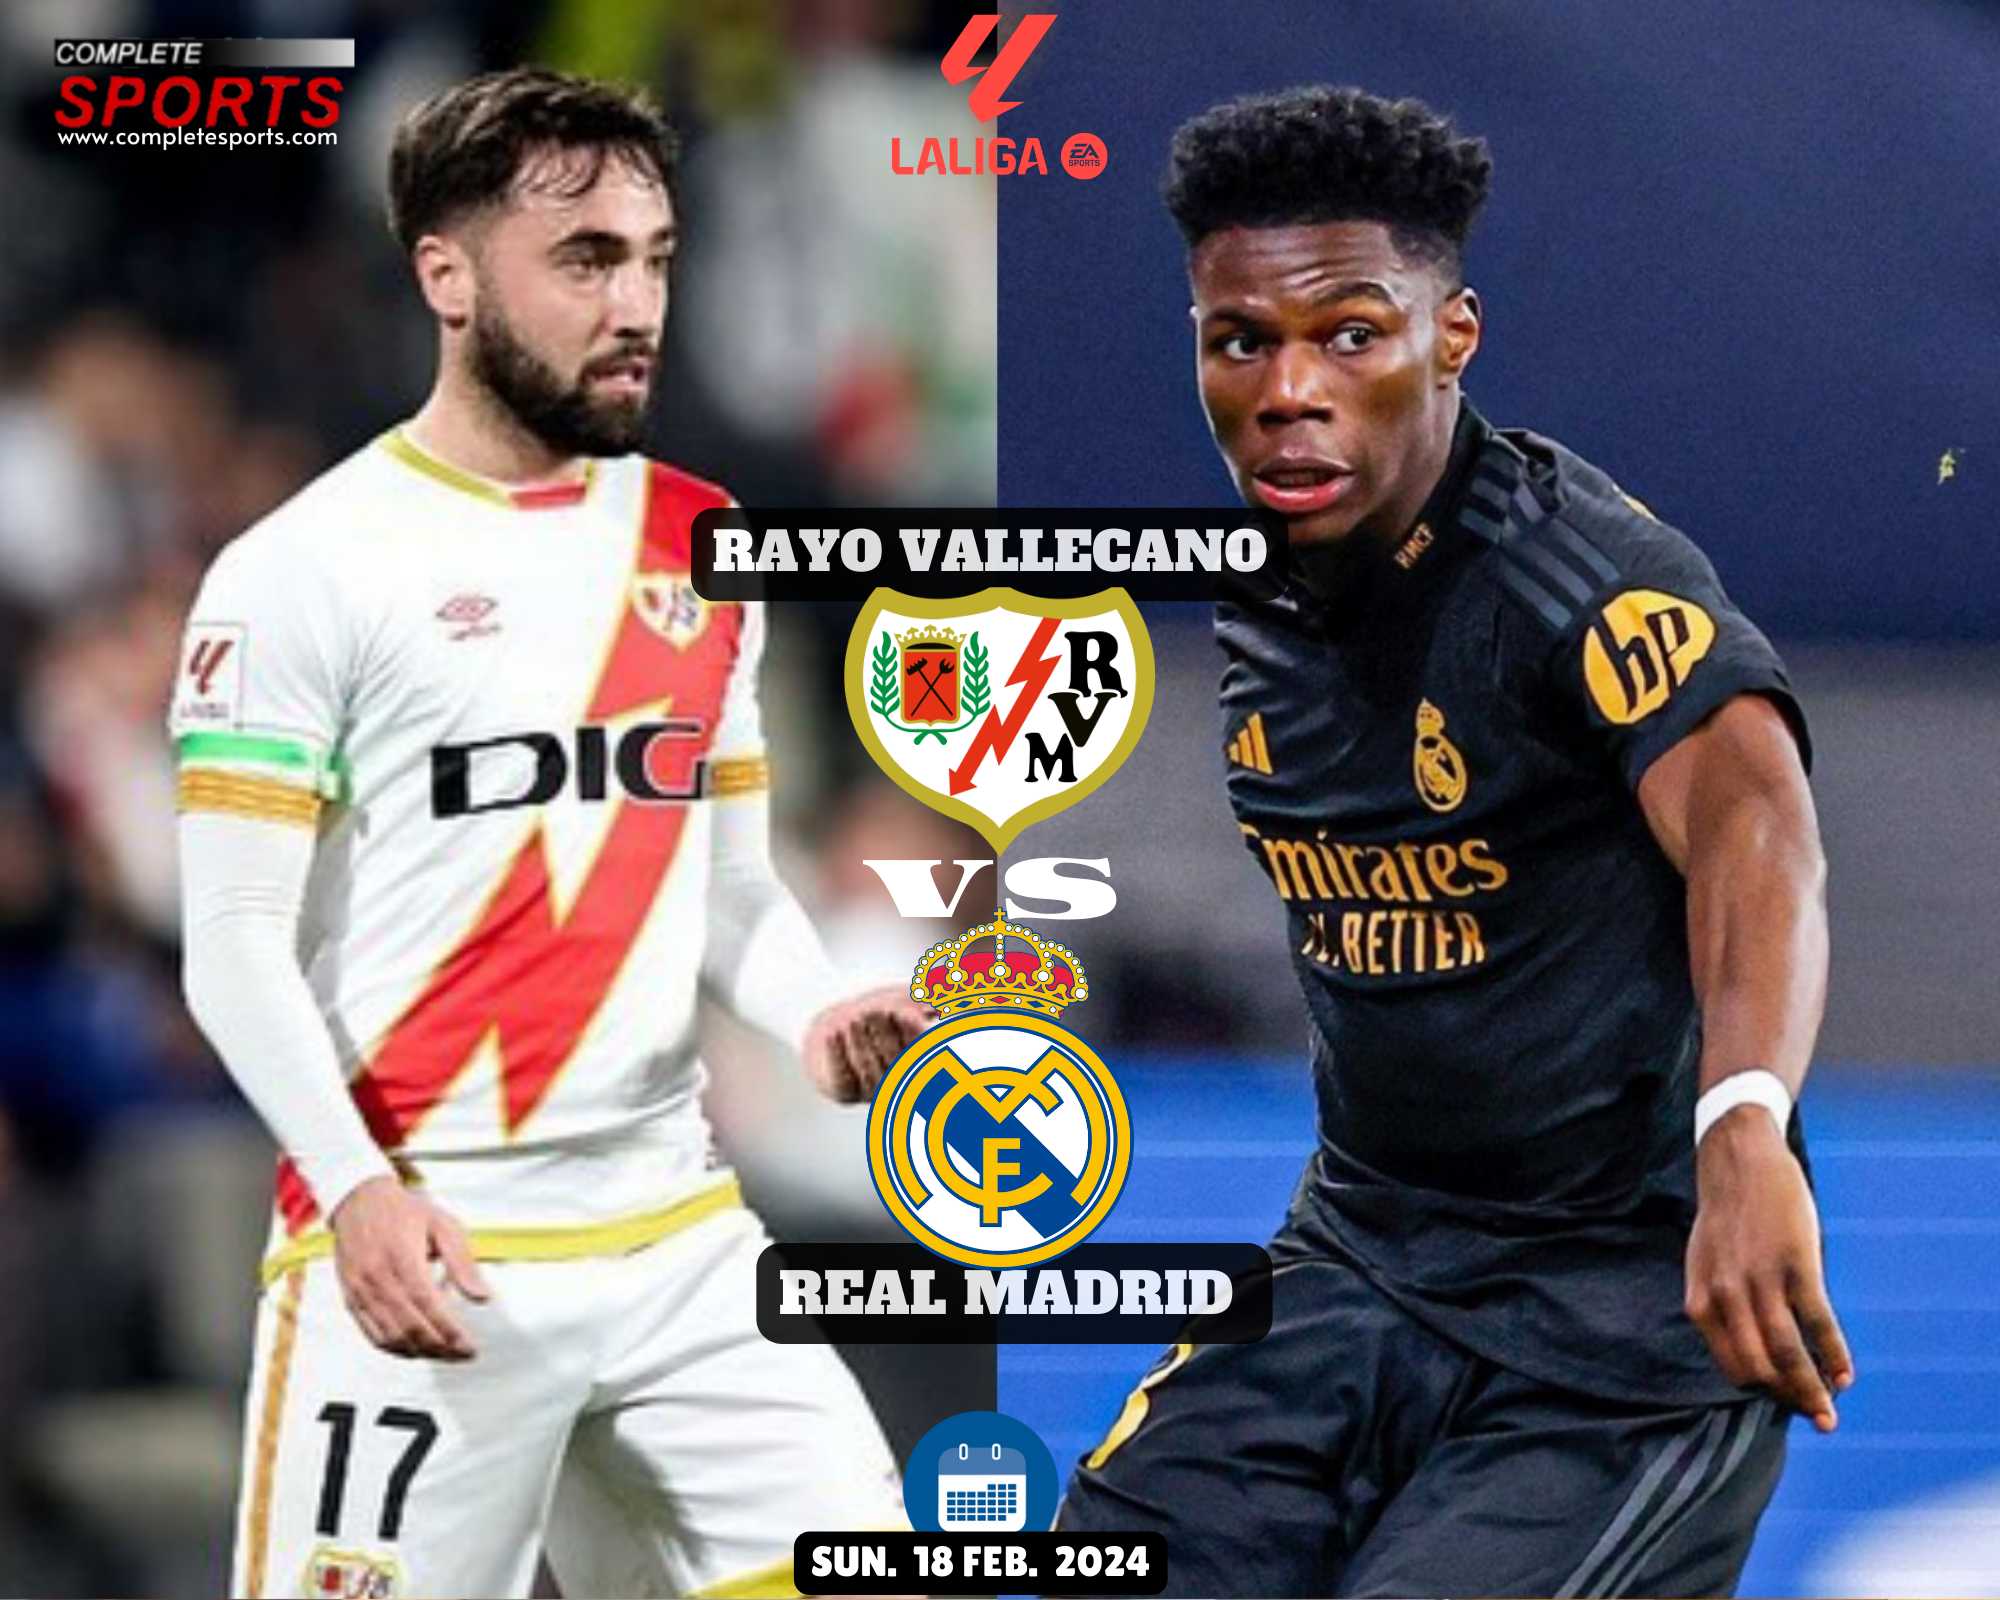 Rayo Vallecano Vs Real Madrid: Predictions And Match Preview